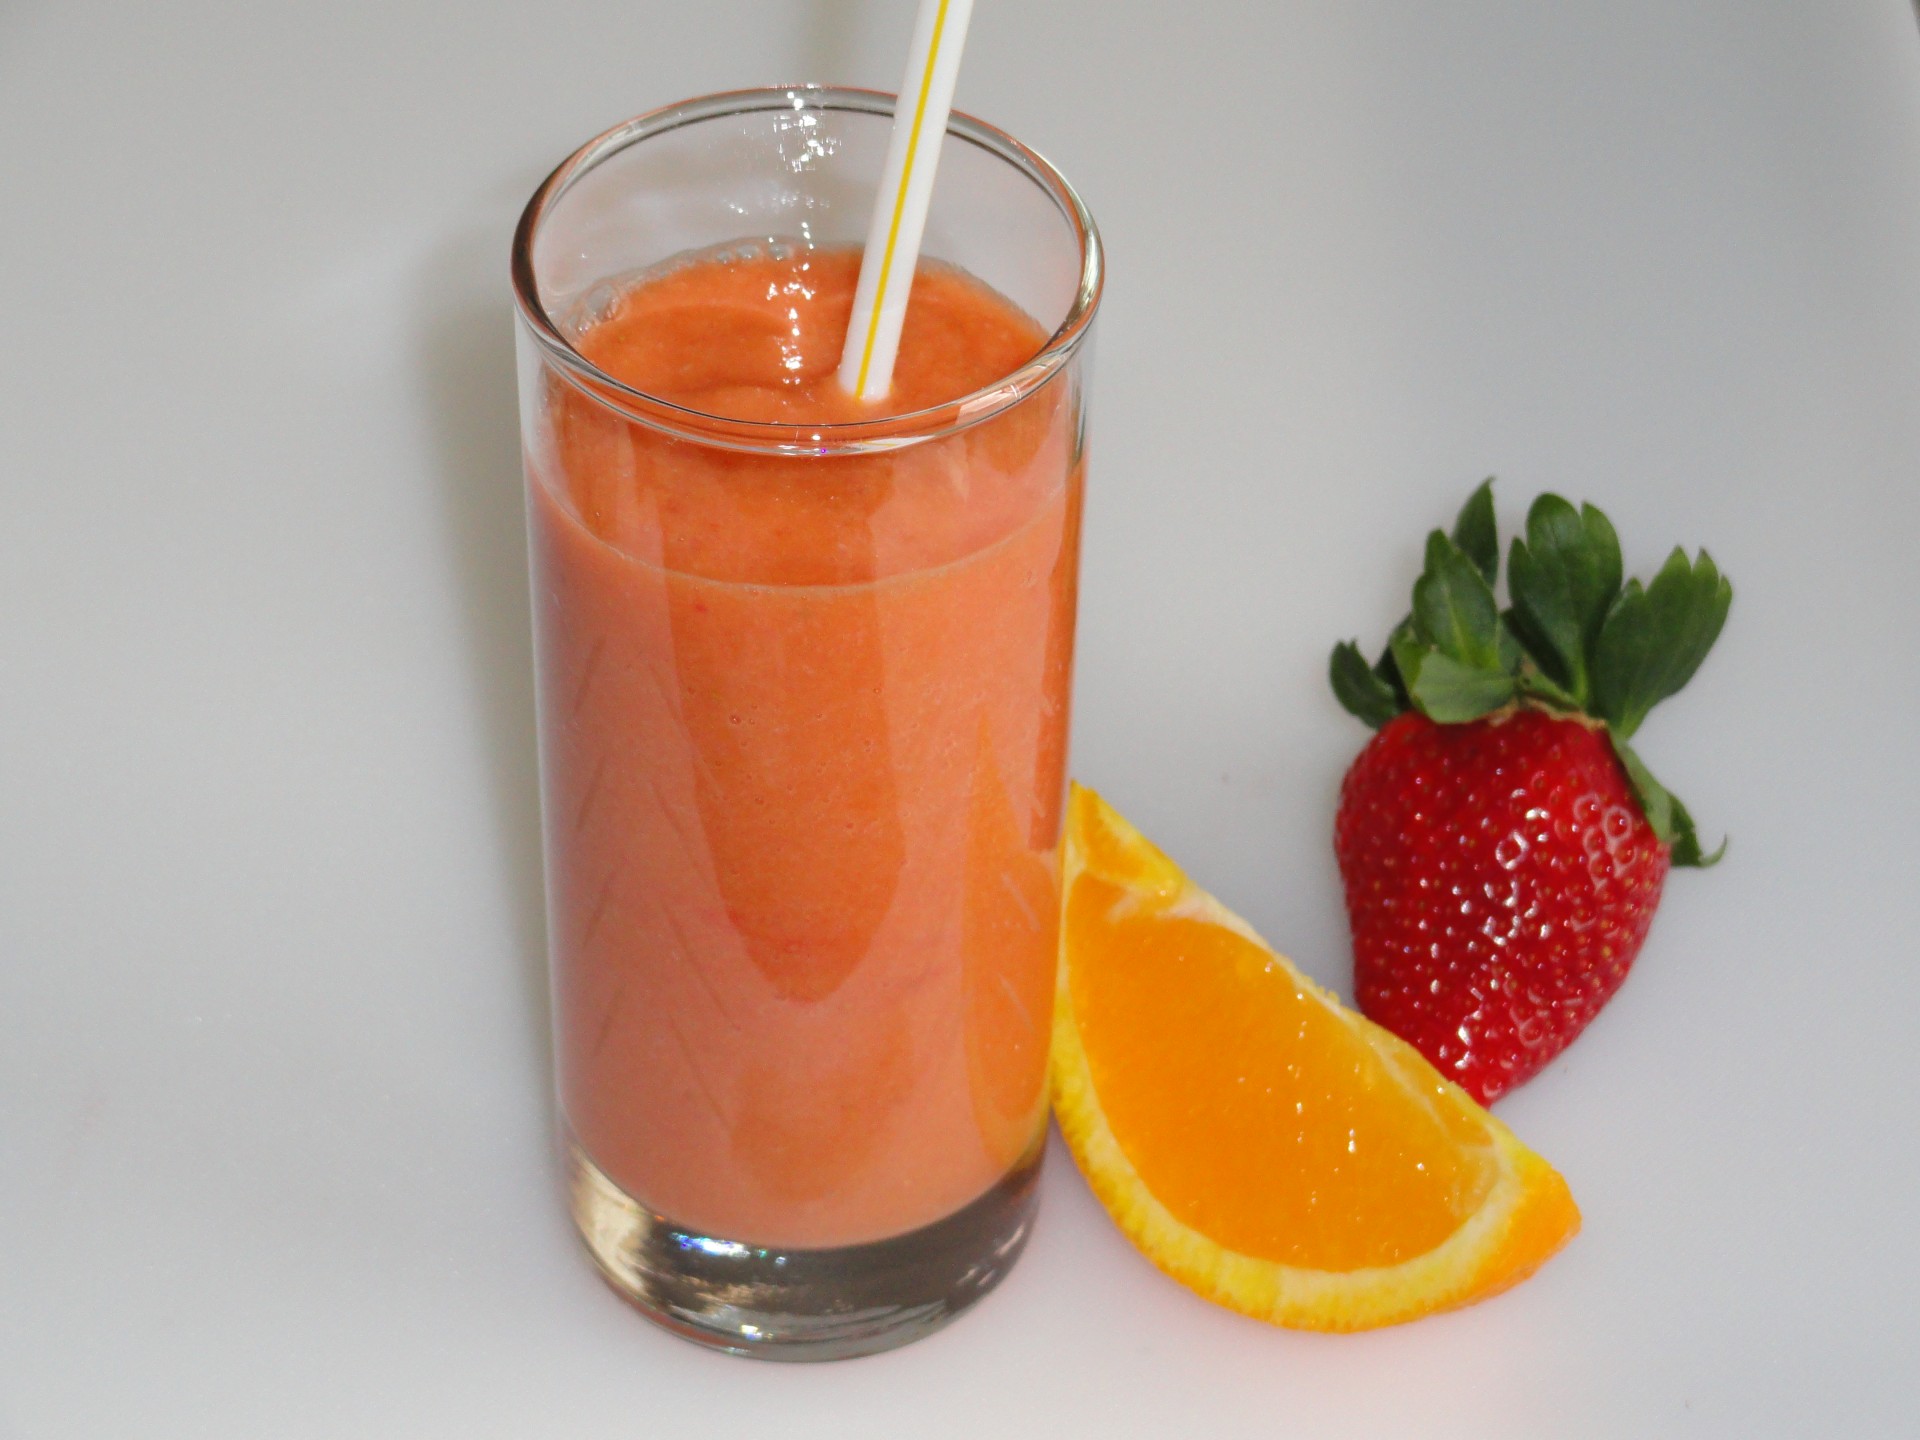 Very fruity smoothie